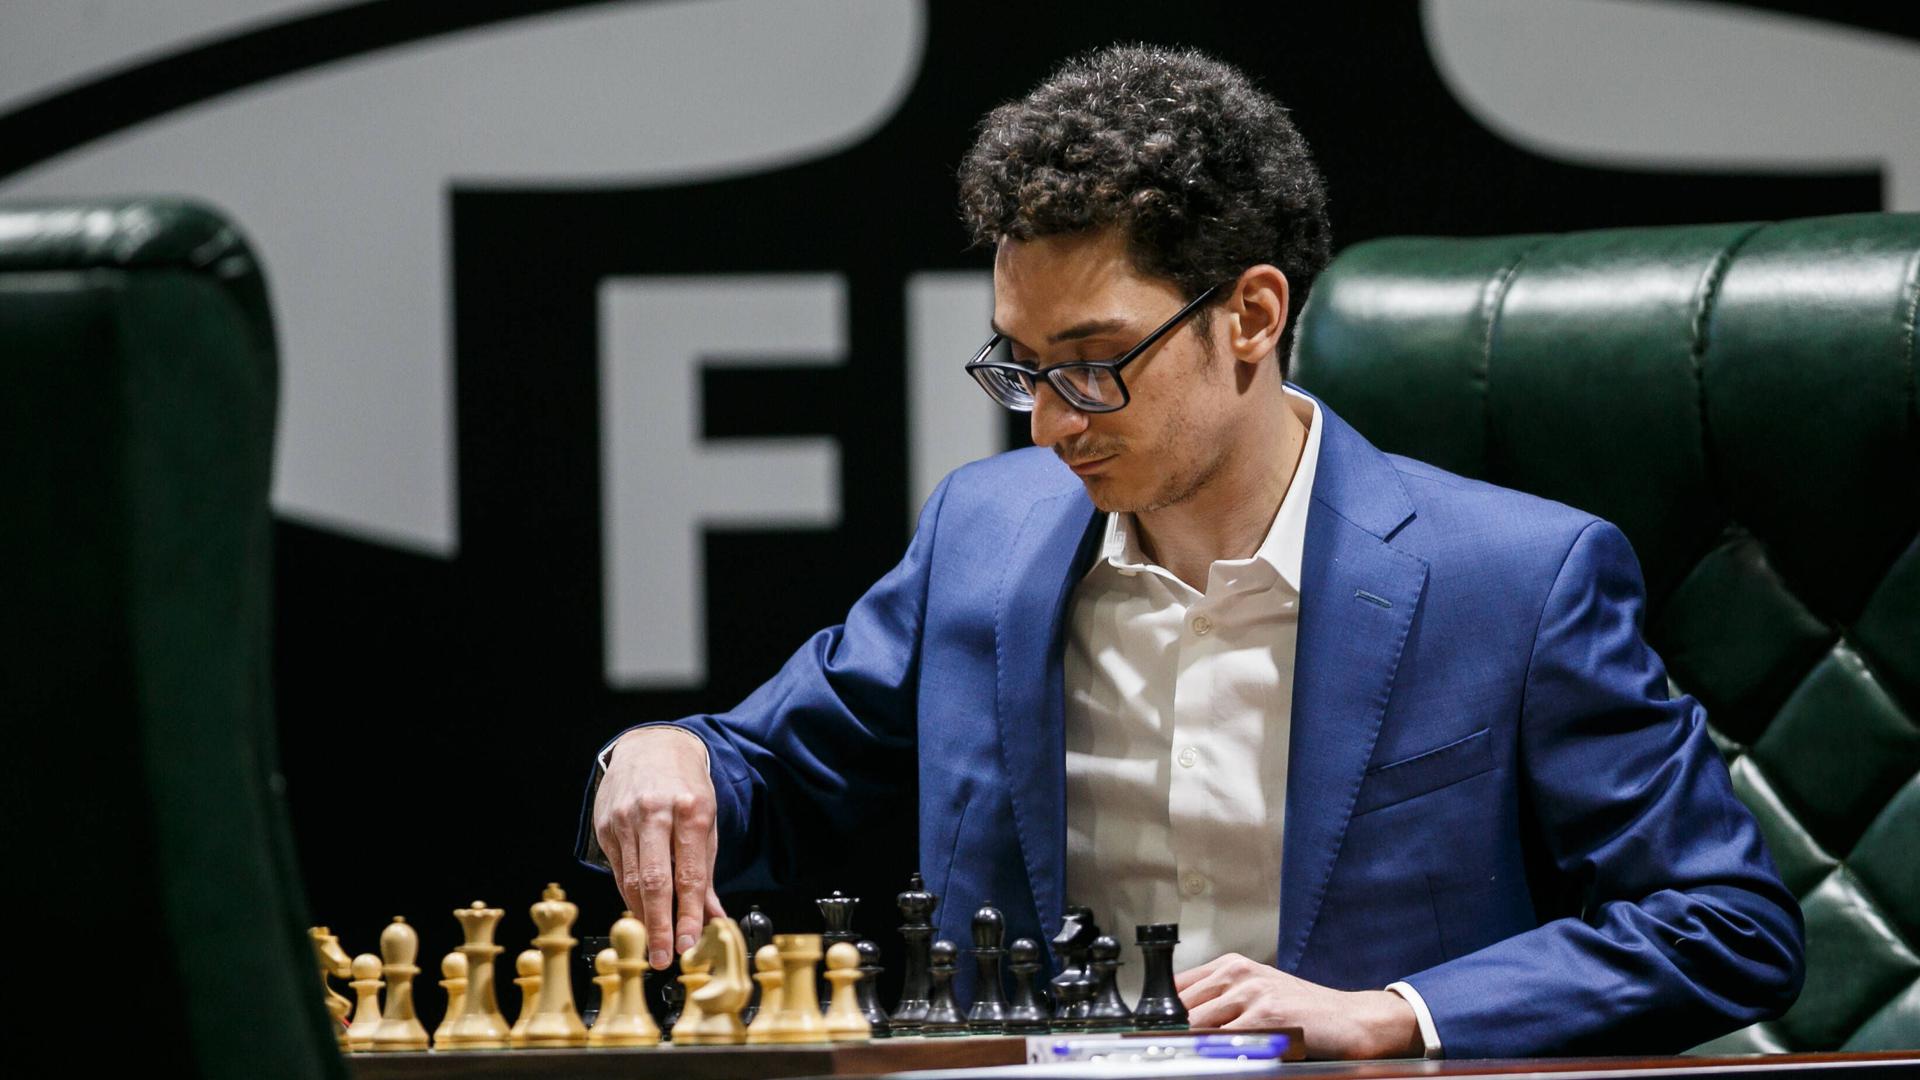 YEKATERINBURG, RUSSIA - MARCH 17, 2020: Chess player Fabiano Caruana of the USA during the 2020 FIDE Candidates chess tournament at the Hyatt Regency Ekaterinburg Hotel. The event is to determine who will challenge Magnus Carlsen for the title of the World Chess Champion. The event is held behind closed doors due to the coronavirus pandemic. Alexei Kolchin/TASS PUBLICATIONxINxGERxAUTxONLY TS0D282F